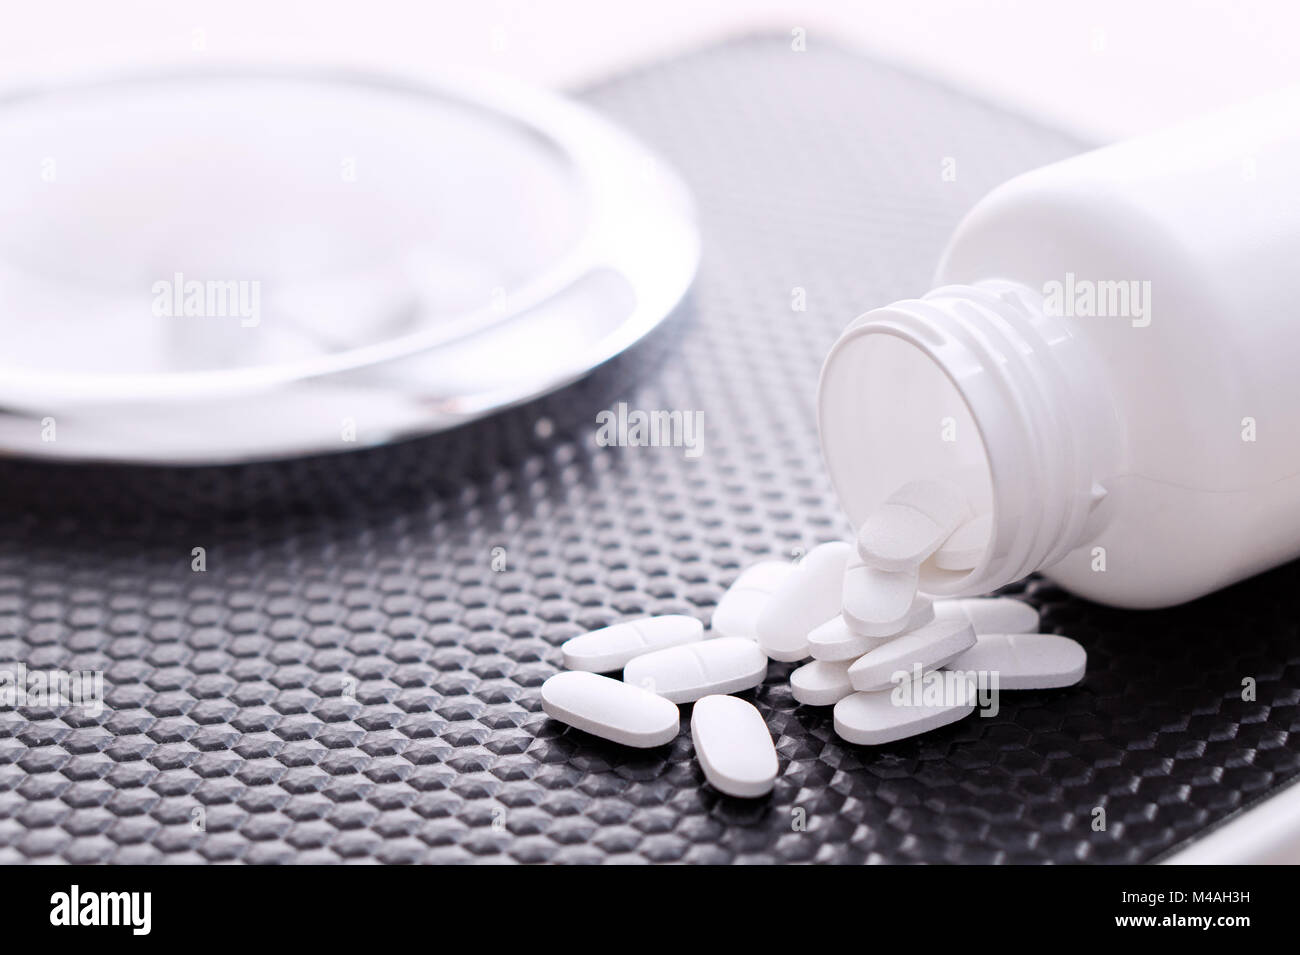 Diet pills on a scale. Weight loss medicine spilled out from bottle. Stock Photo